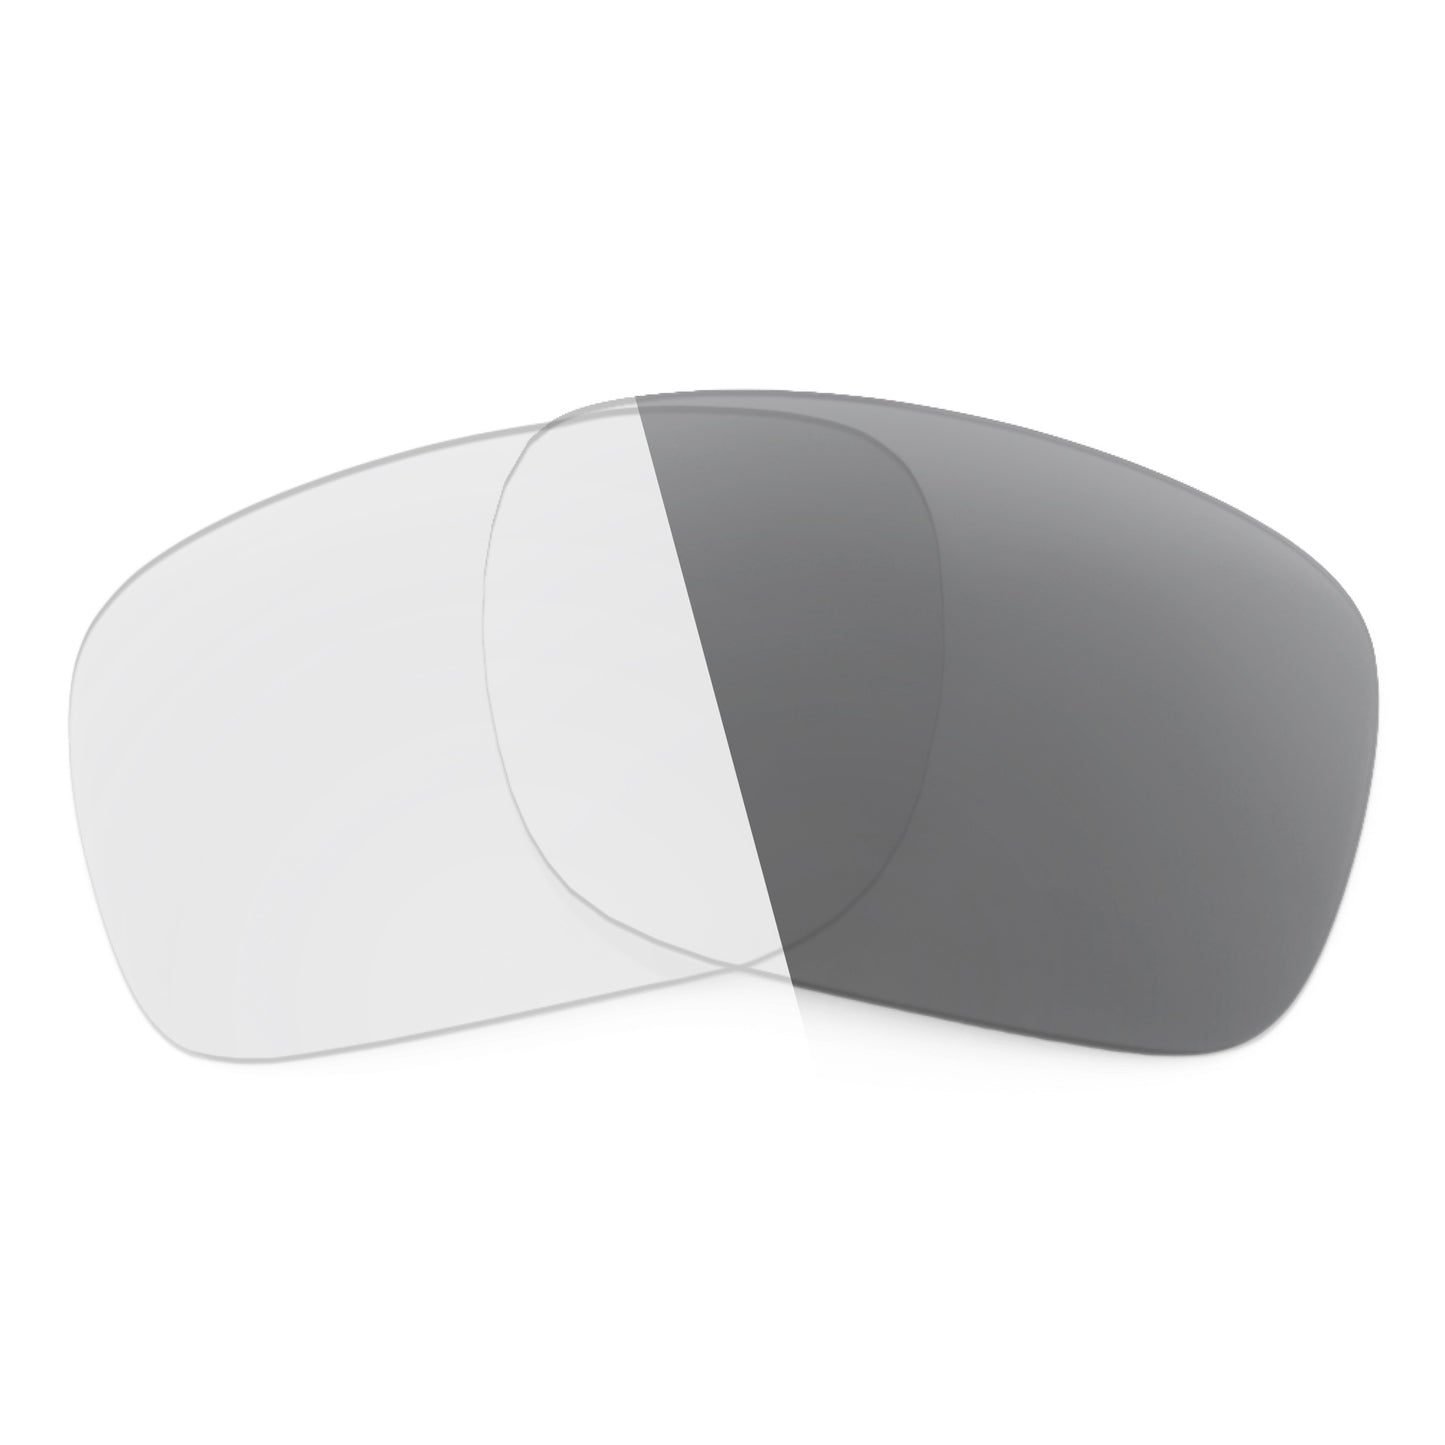 Revant replacement lenses for Ray-Ban Caravan RB3136 55mm Non-Polarized Adapt Gray Photochromic